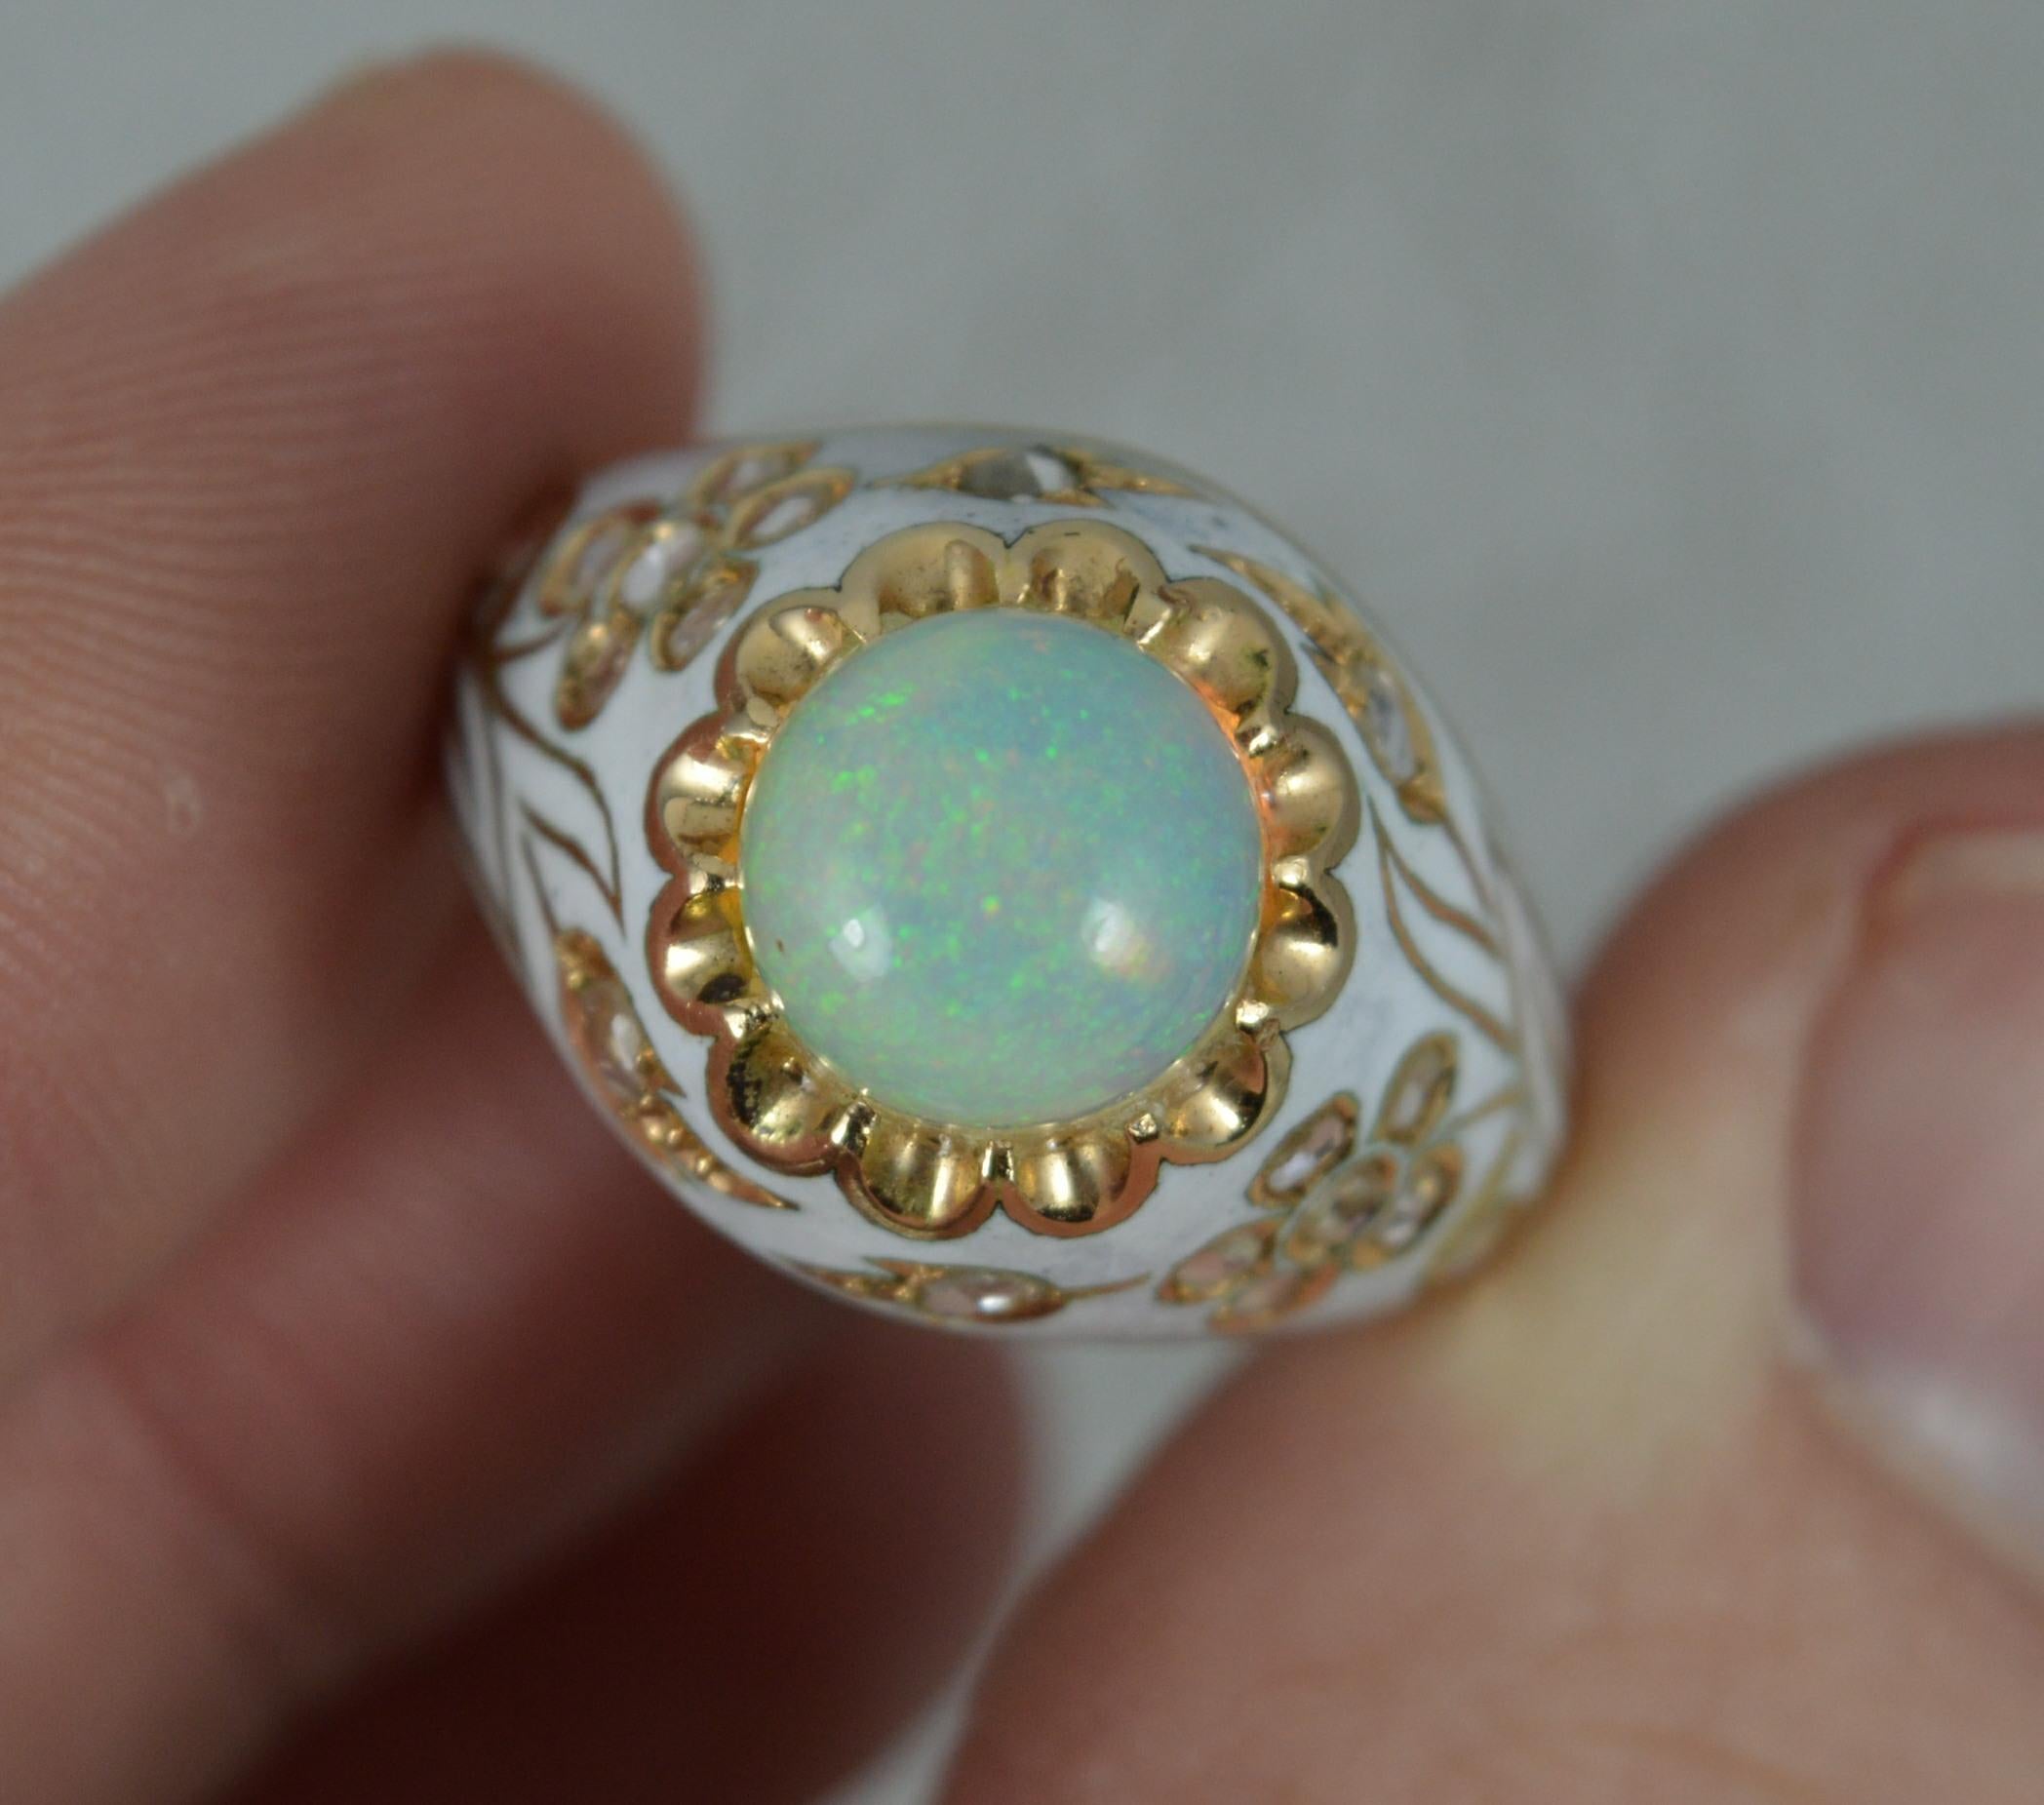 A stunning Opal, Diamond and Enamel ring.
Designed with a large circular natural opal of stunning colour. 8mm diameter.
Surrounding is a white enamel design with floral design including many natural rose cut diamonds.
14mm wide band to the